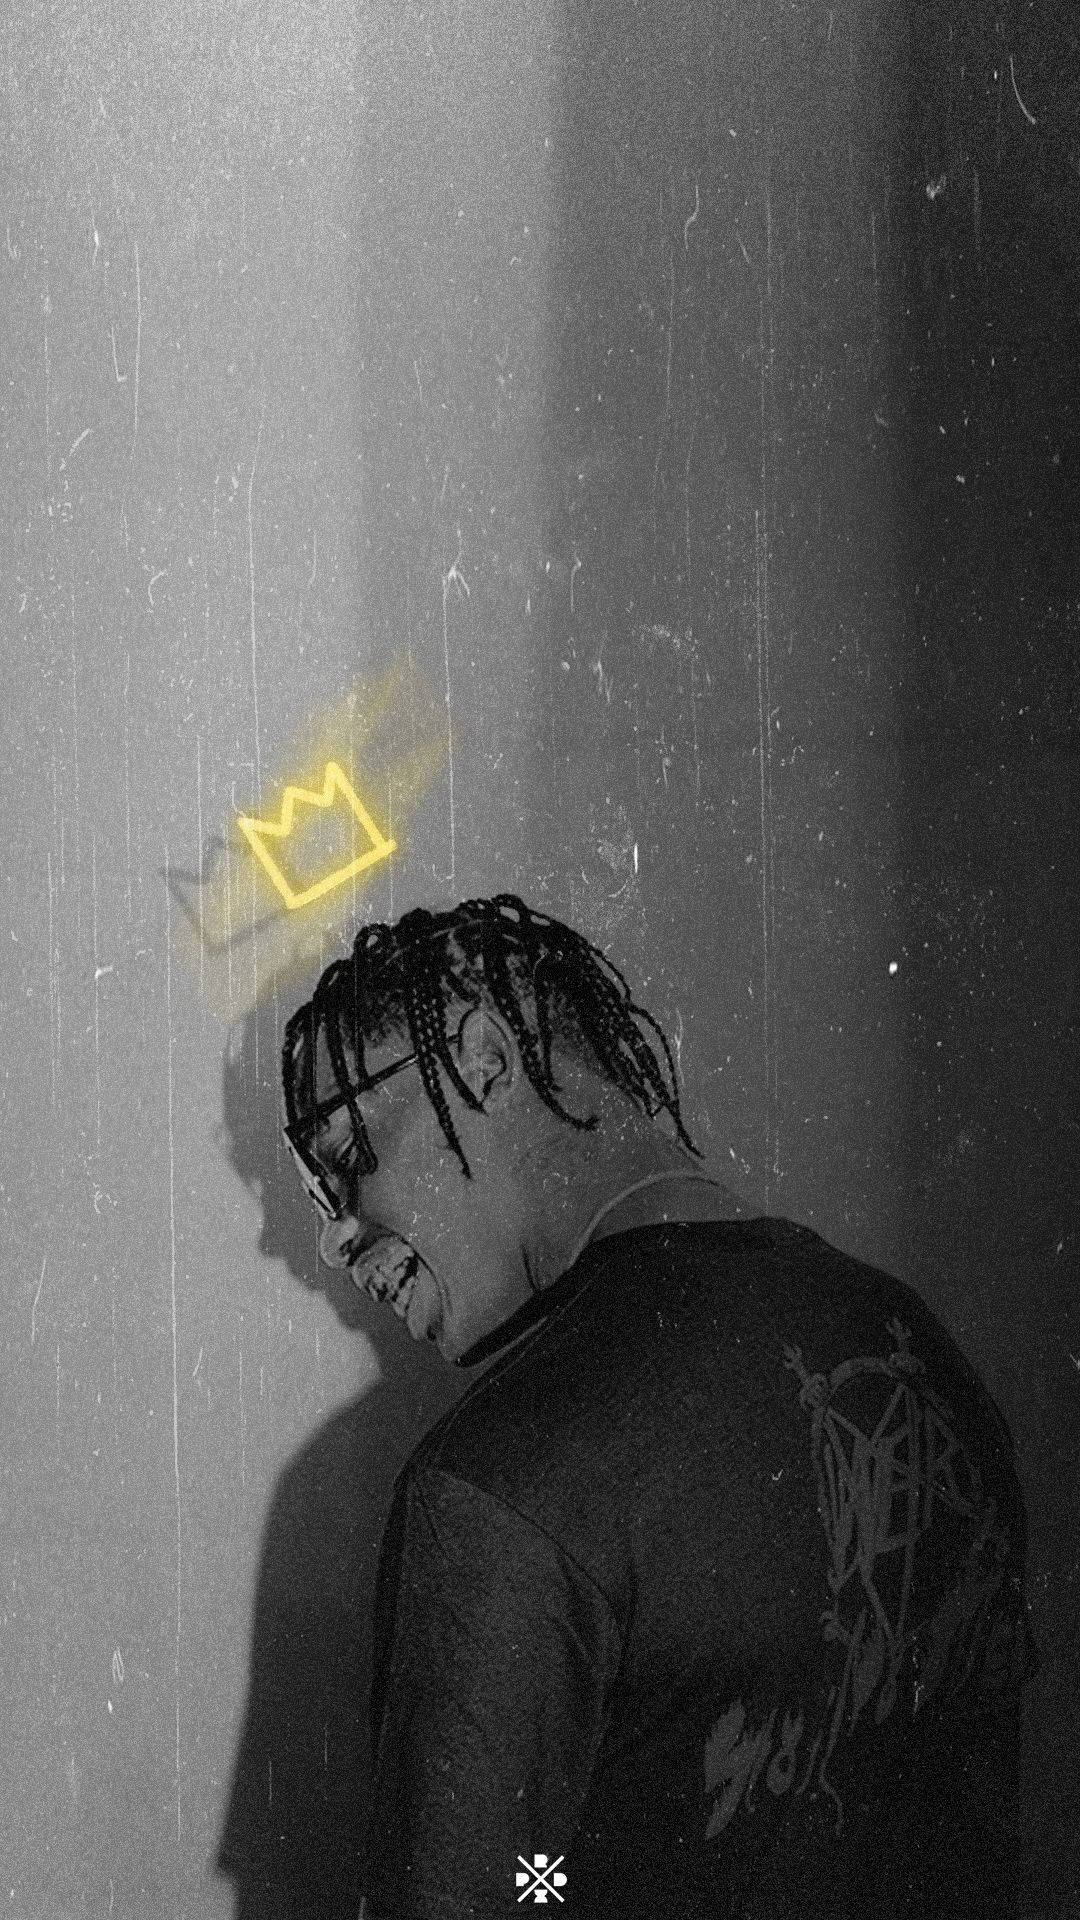 Travis Scott takes center stage with an ethereal look Wallpaper